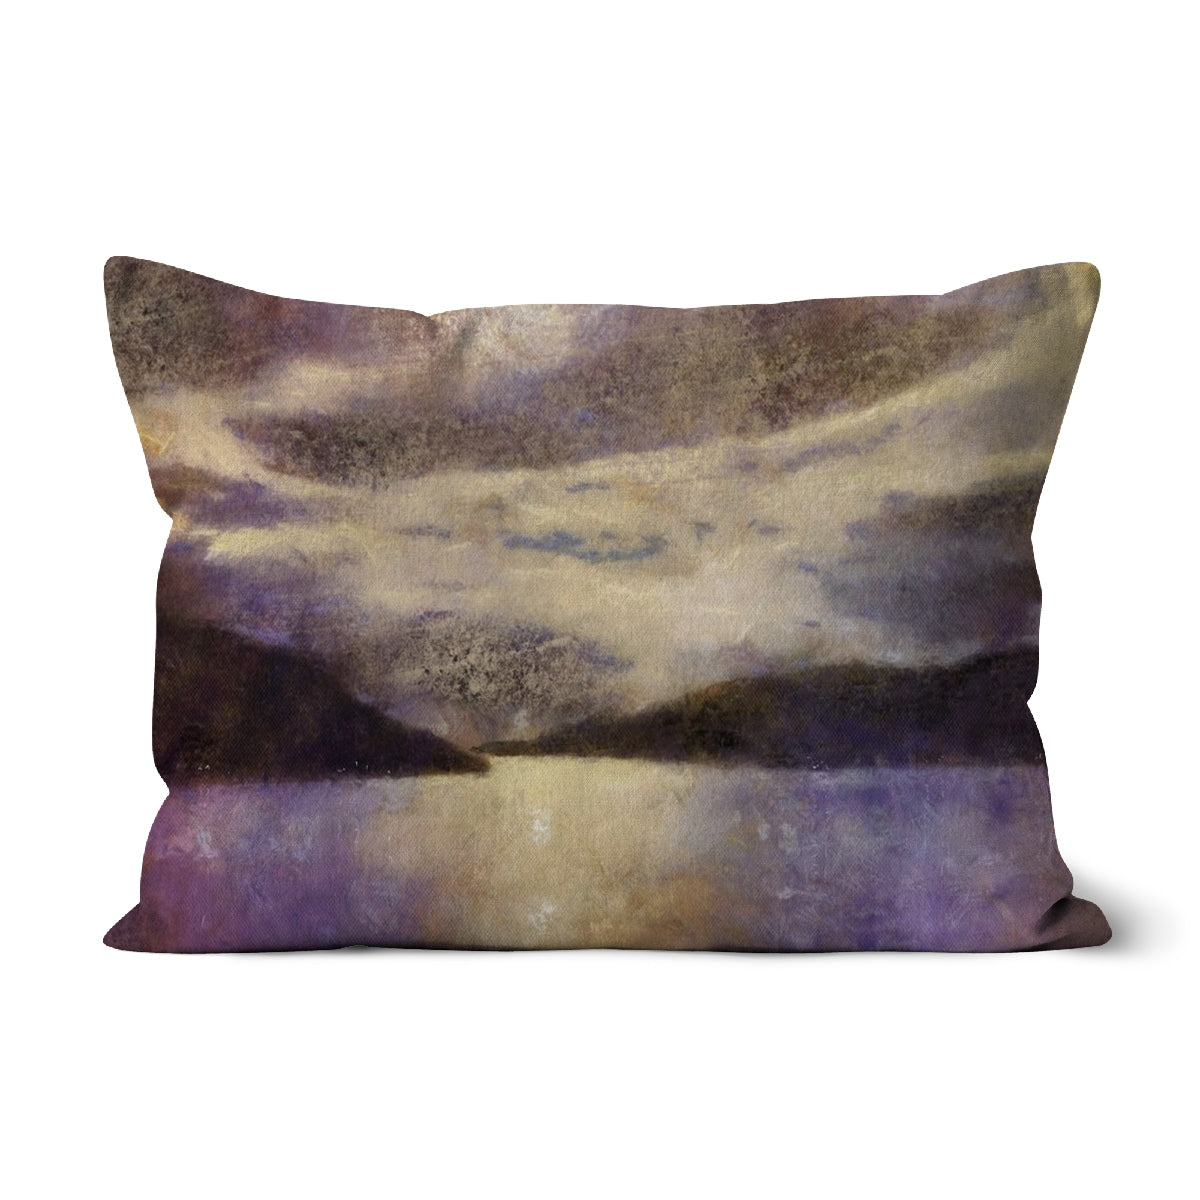 Moonlight Meets Lewis & Harris Art Gifts Cushion-Cushions-Hebridean Islands Art Gallery-Faux Suede-19"x13"-Paintings, Prints, Homeware, Art Gifts From Scotland By Scottish Artist Kevin Hunter